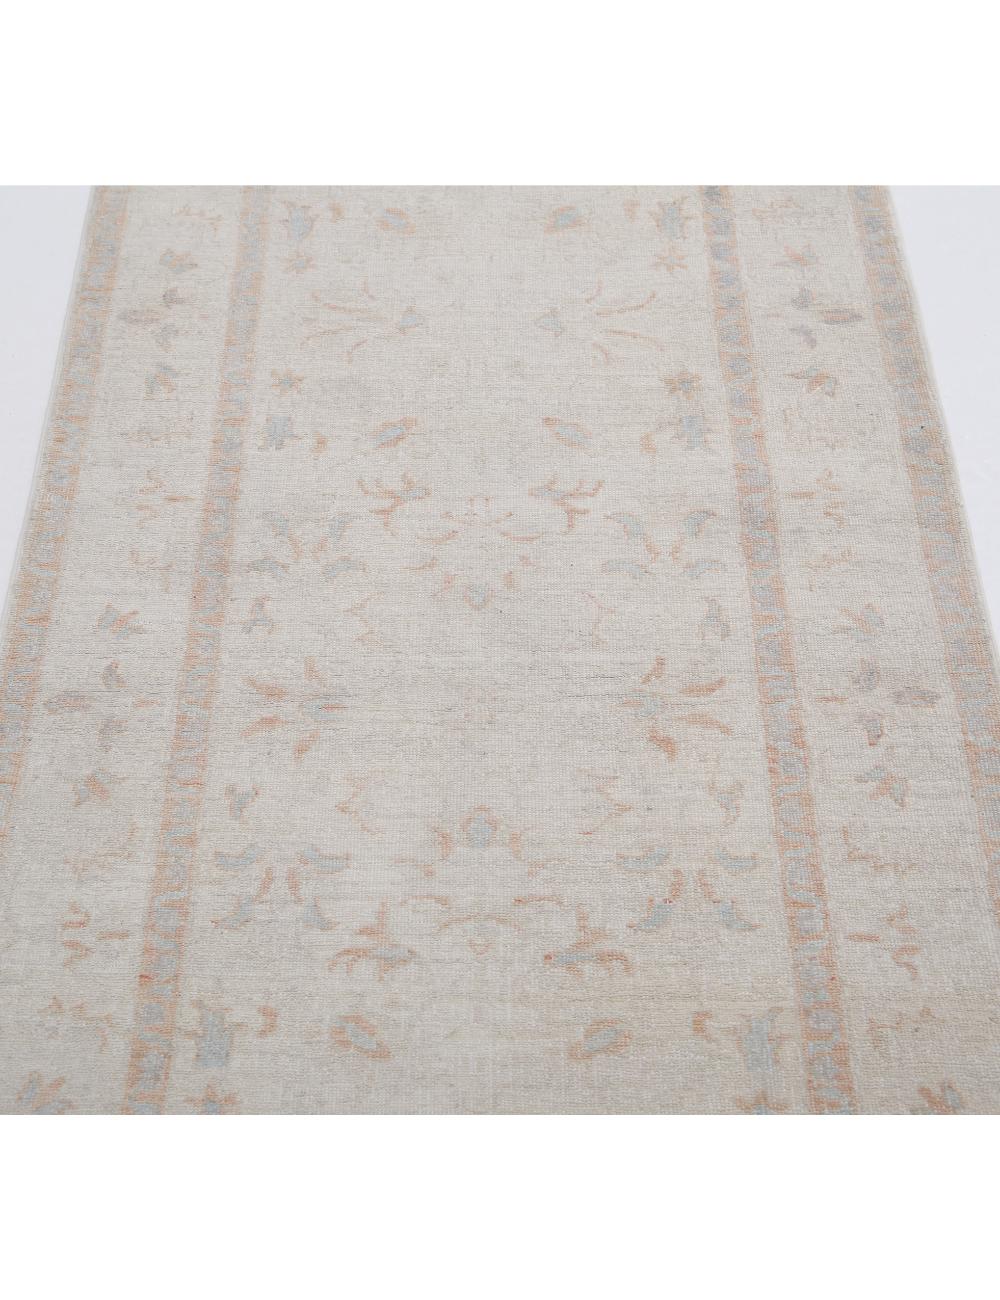 Serenity 2' 10" X 7' 7" Hand-Knotted Wool Rug 2' 10" X 7' 7" (86 X 231) / Ivory / Blue